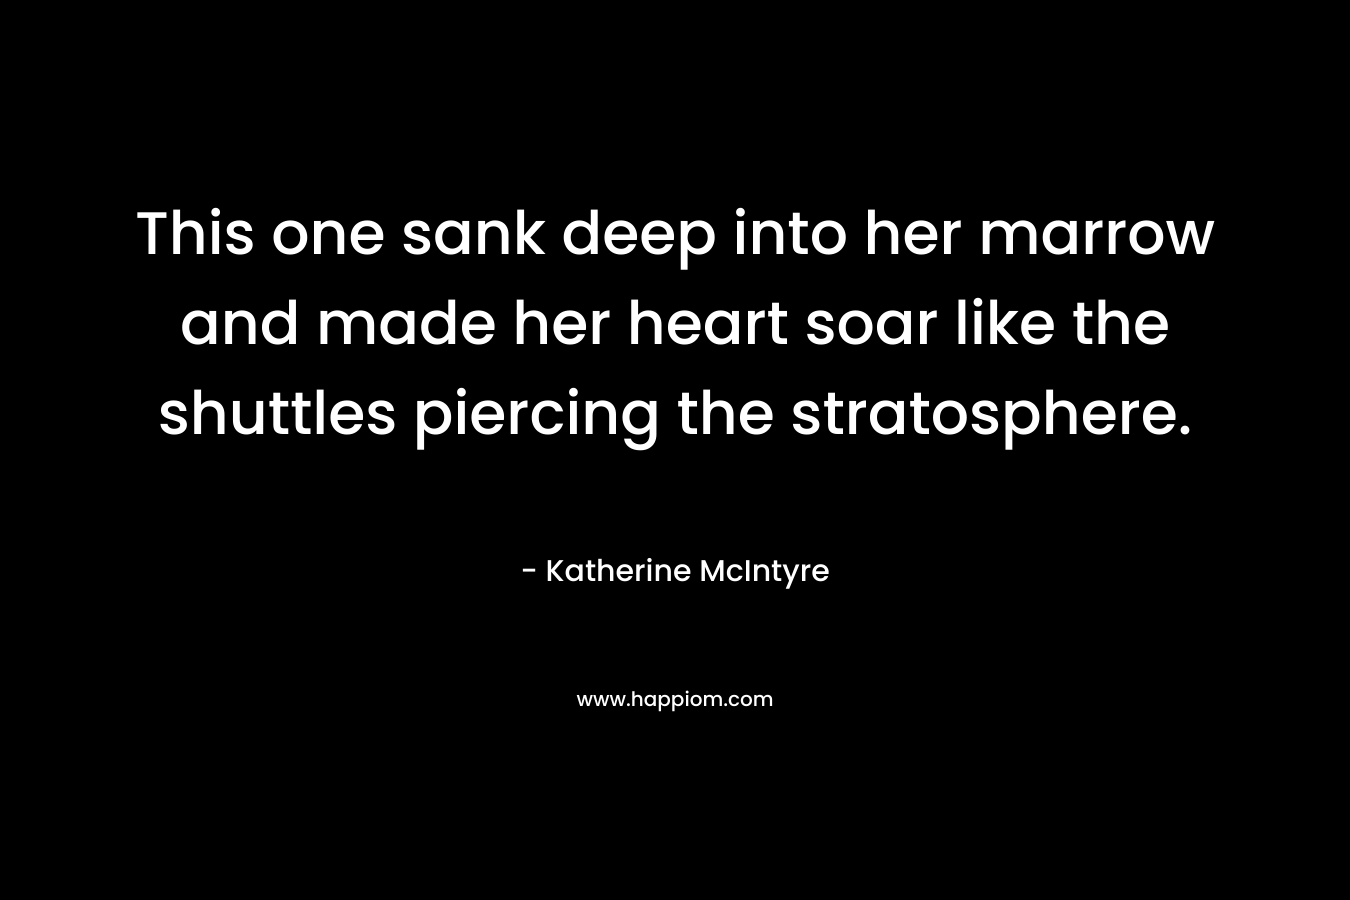 This one sank deep into her marrow and made her heart soar like the shuttles piercing the stratosphere.